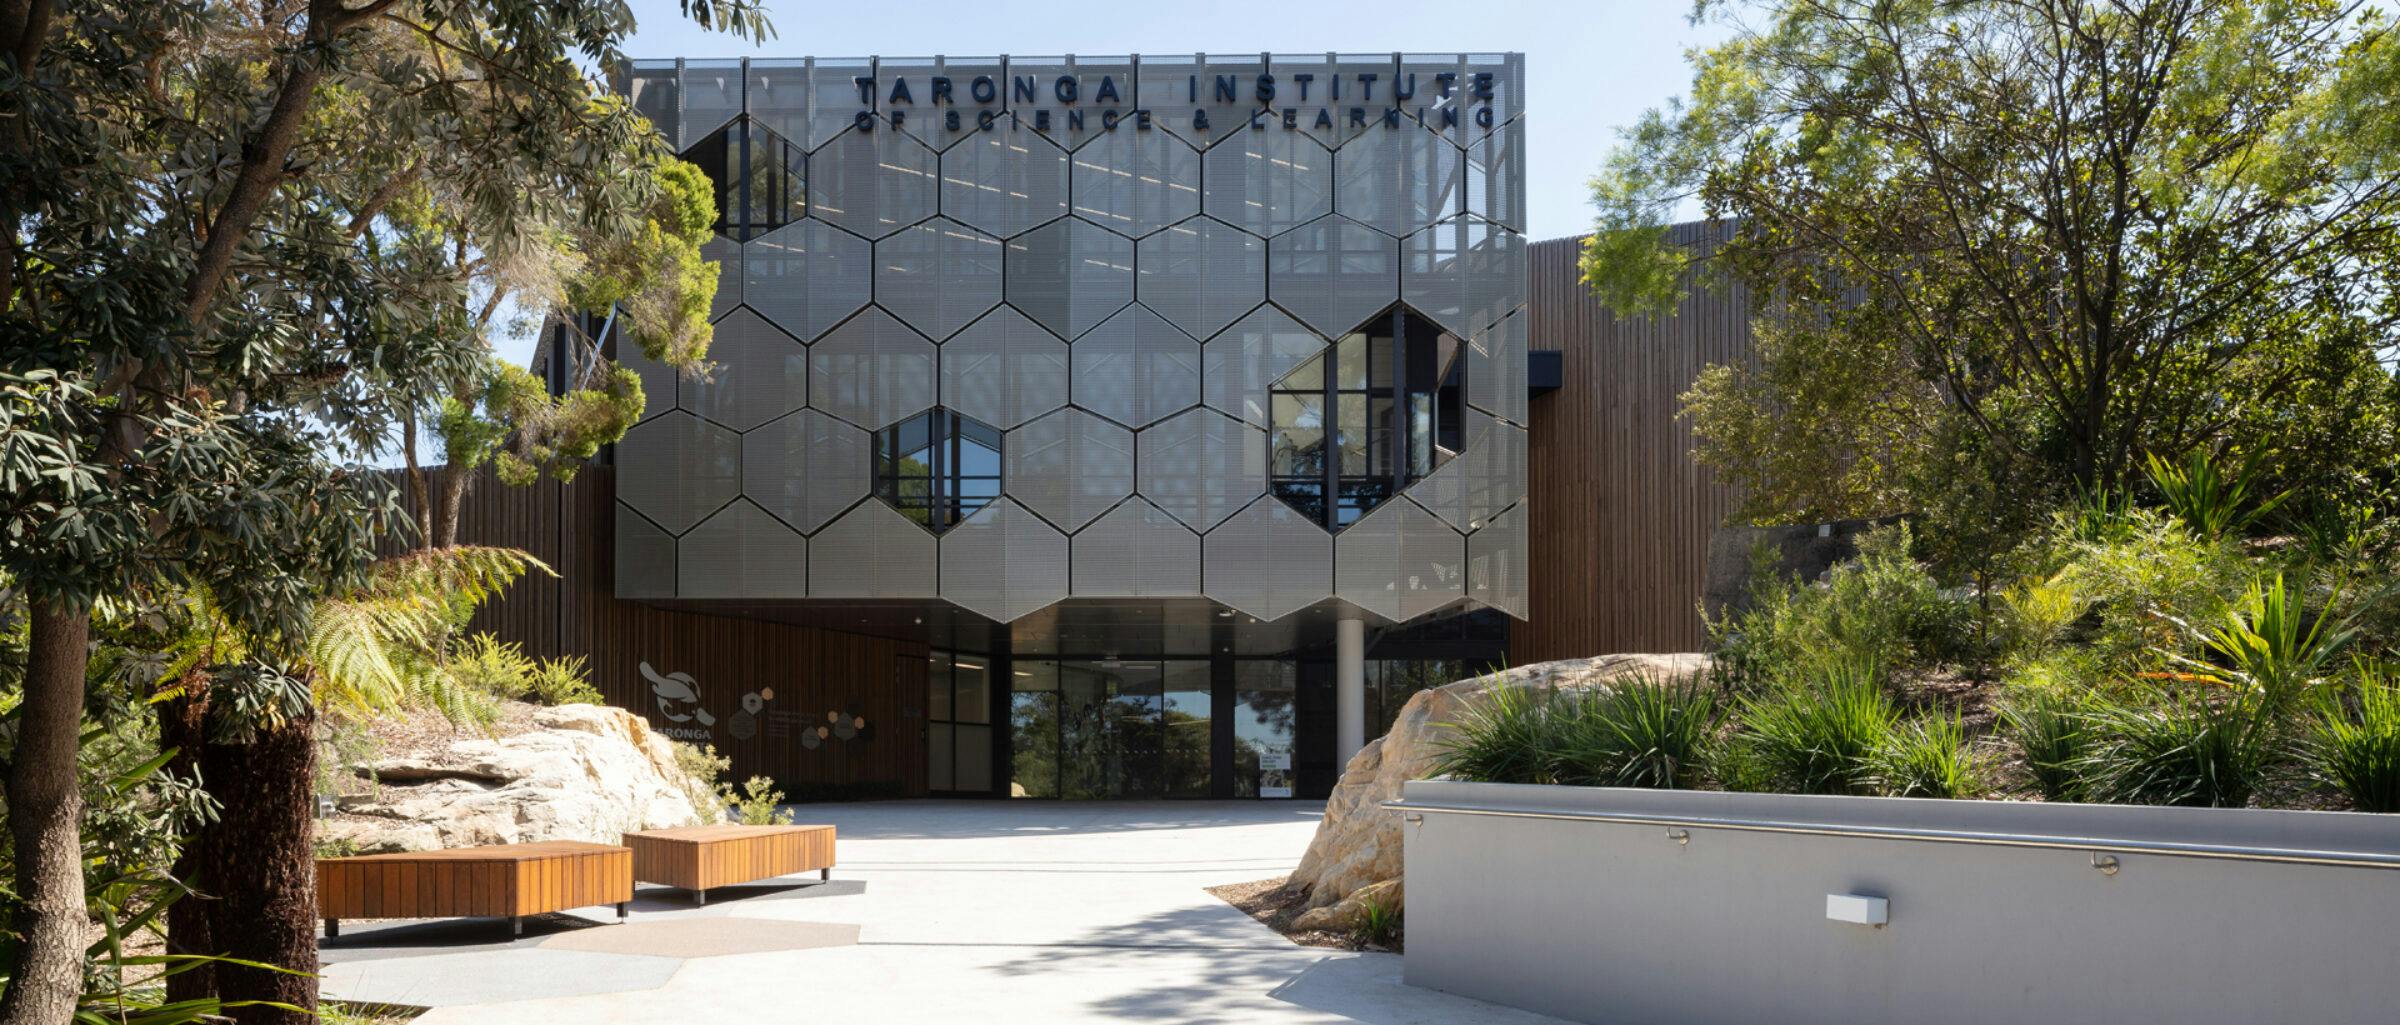 Taronga Institute Of Science And Learning